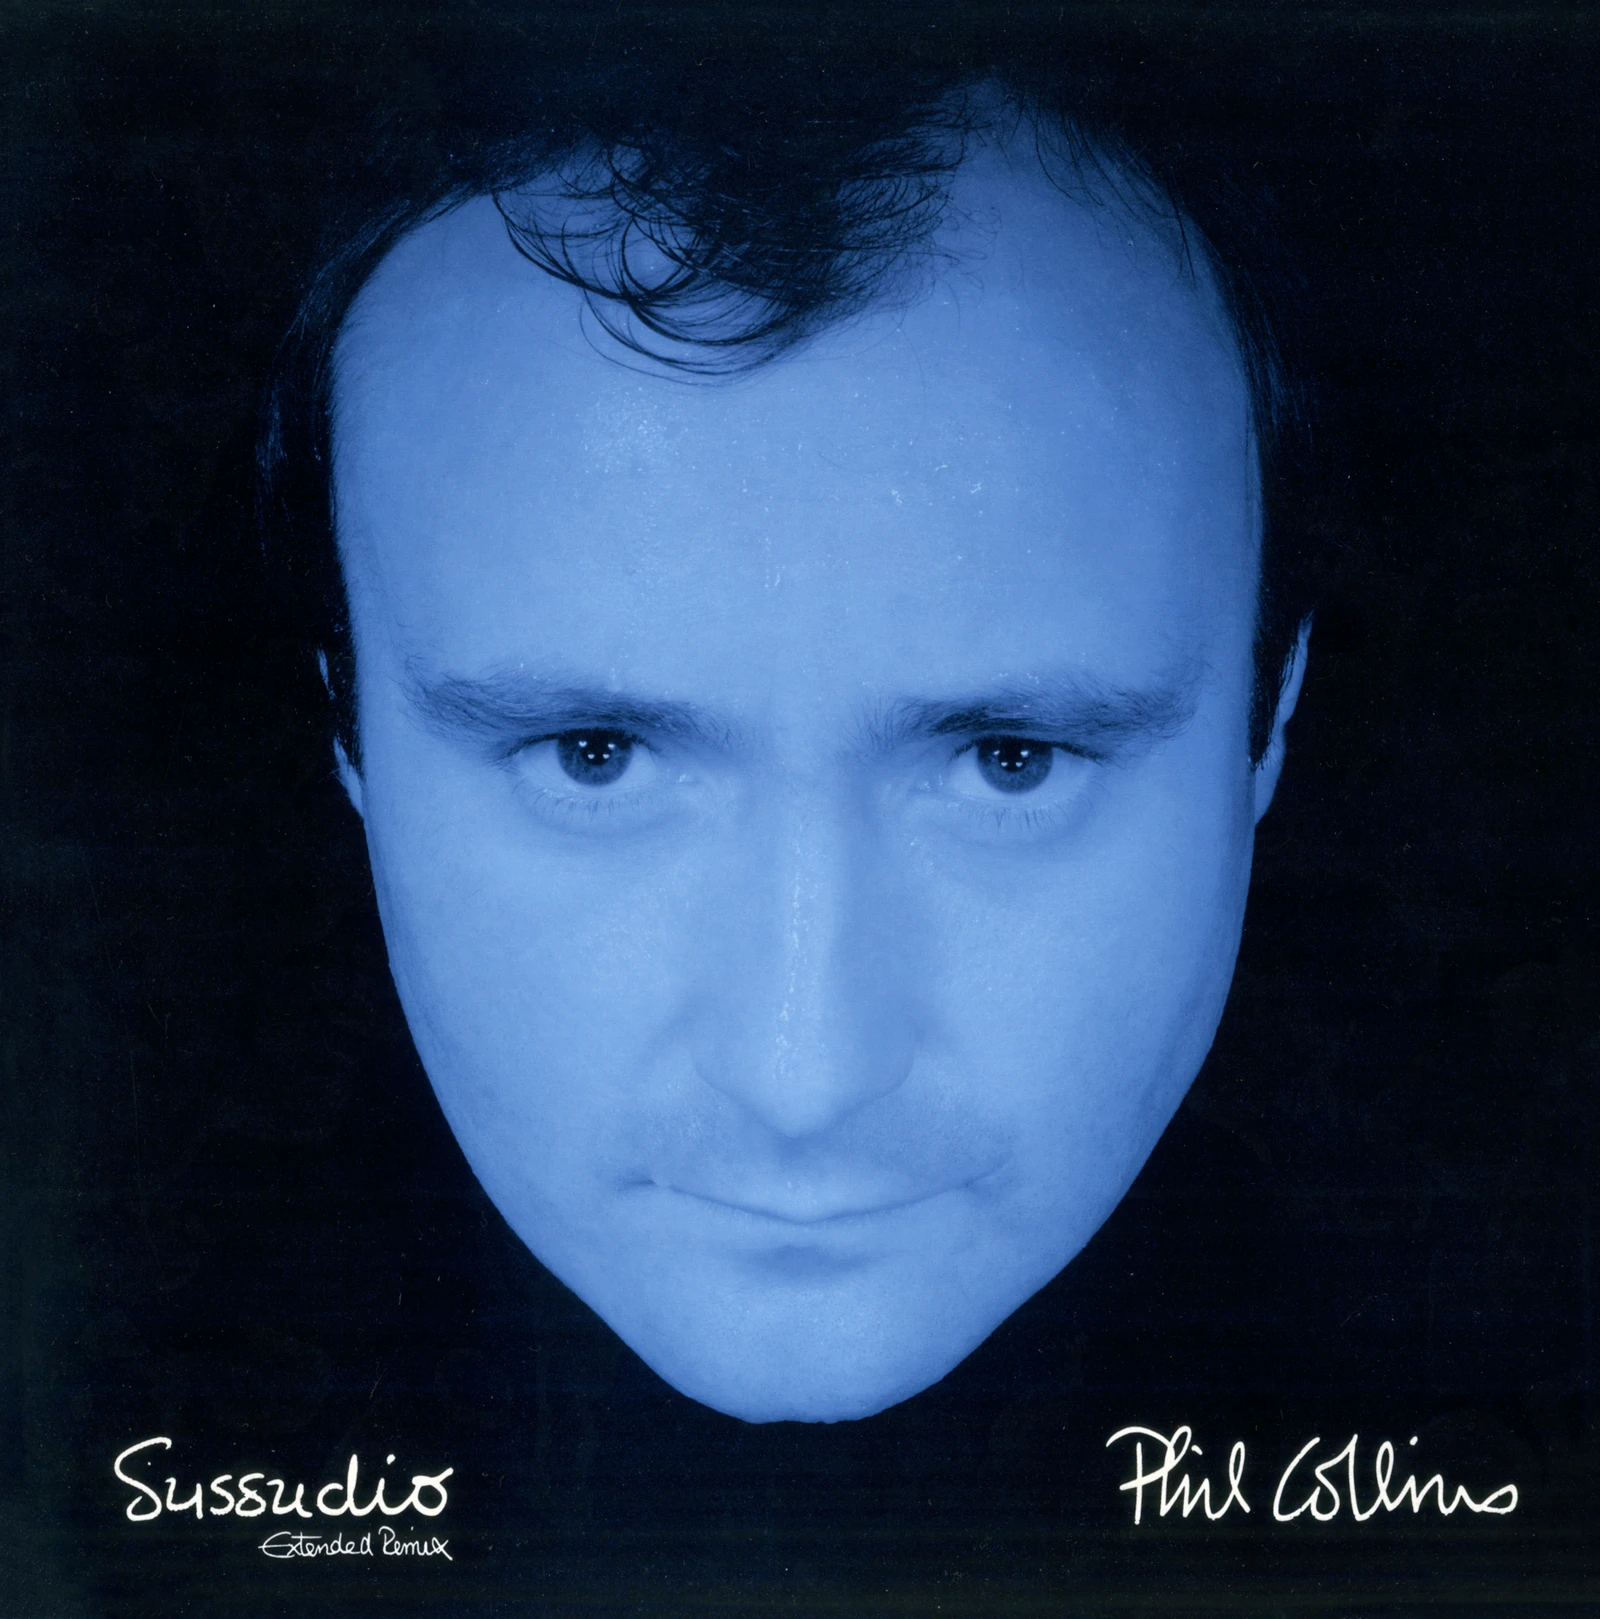 Sussudio (Extended Remix) – Phil Collins